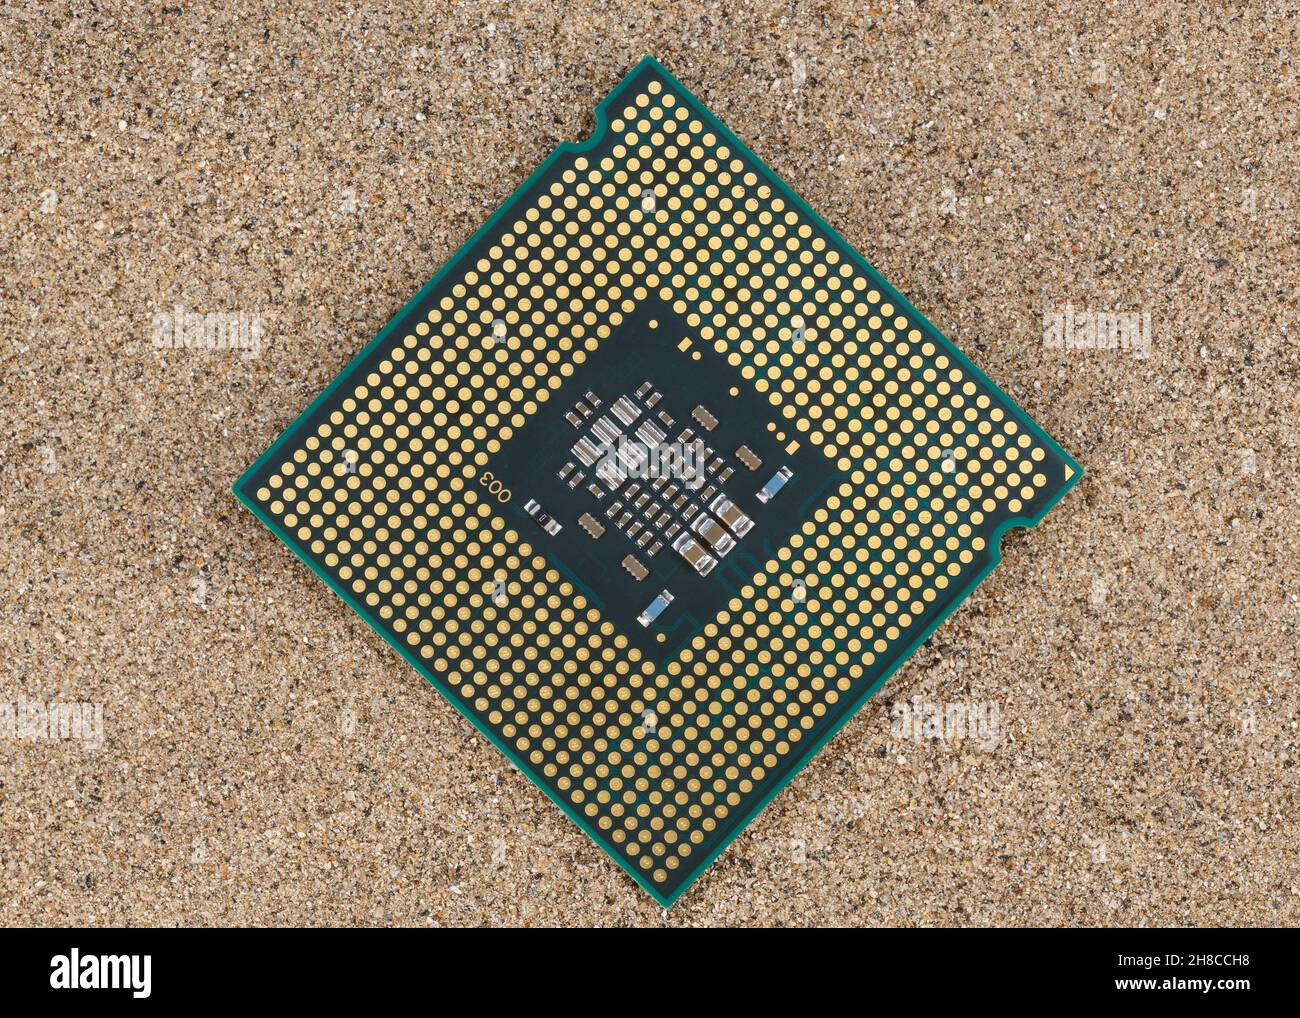 The microprocessor lies on the sand. Concept for the production of silicon semiconductors from sand. Stock Photo